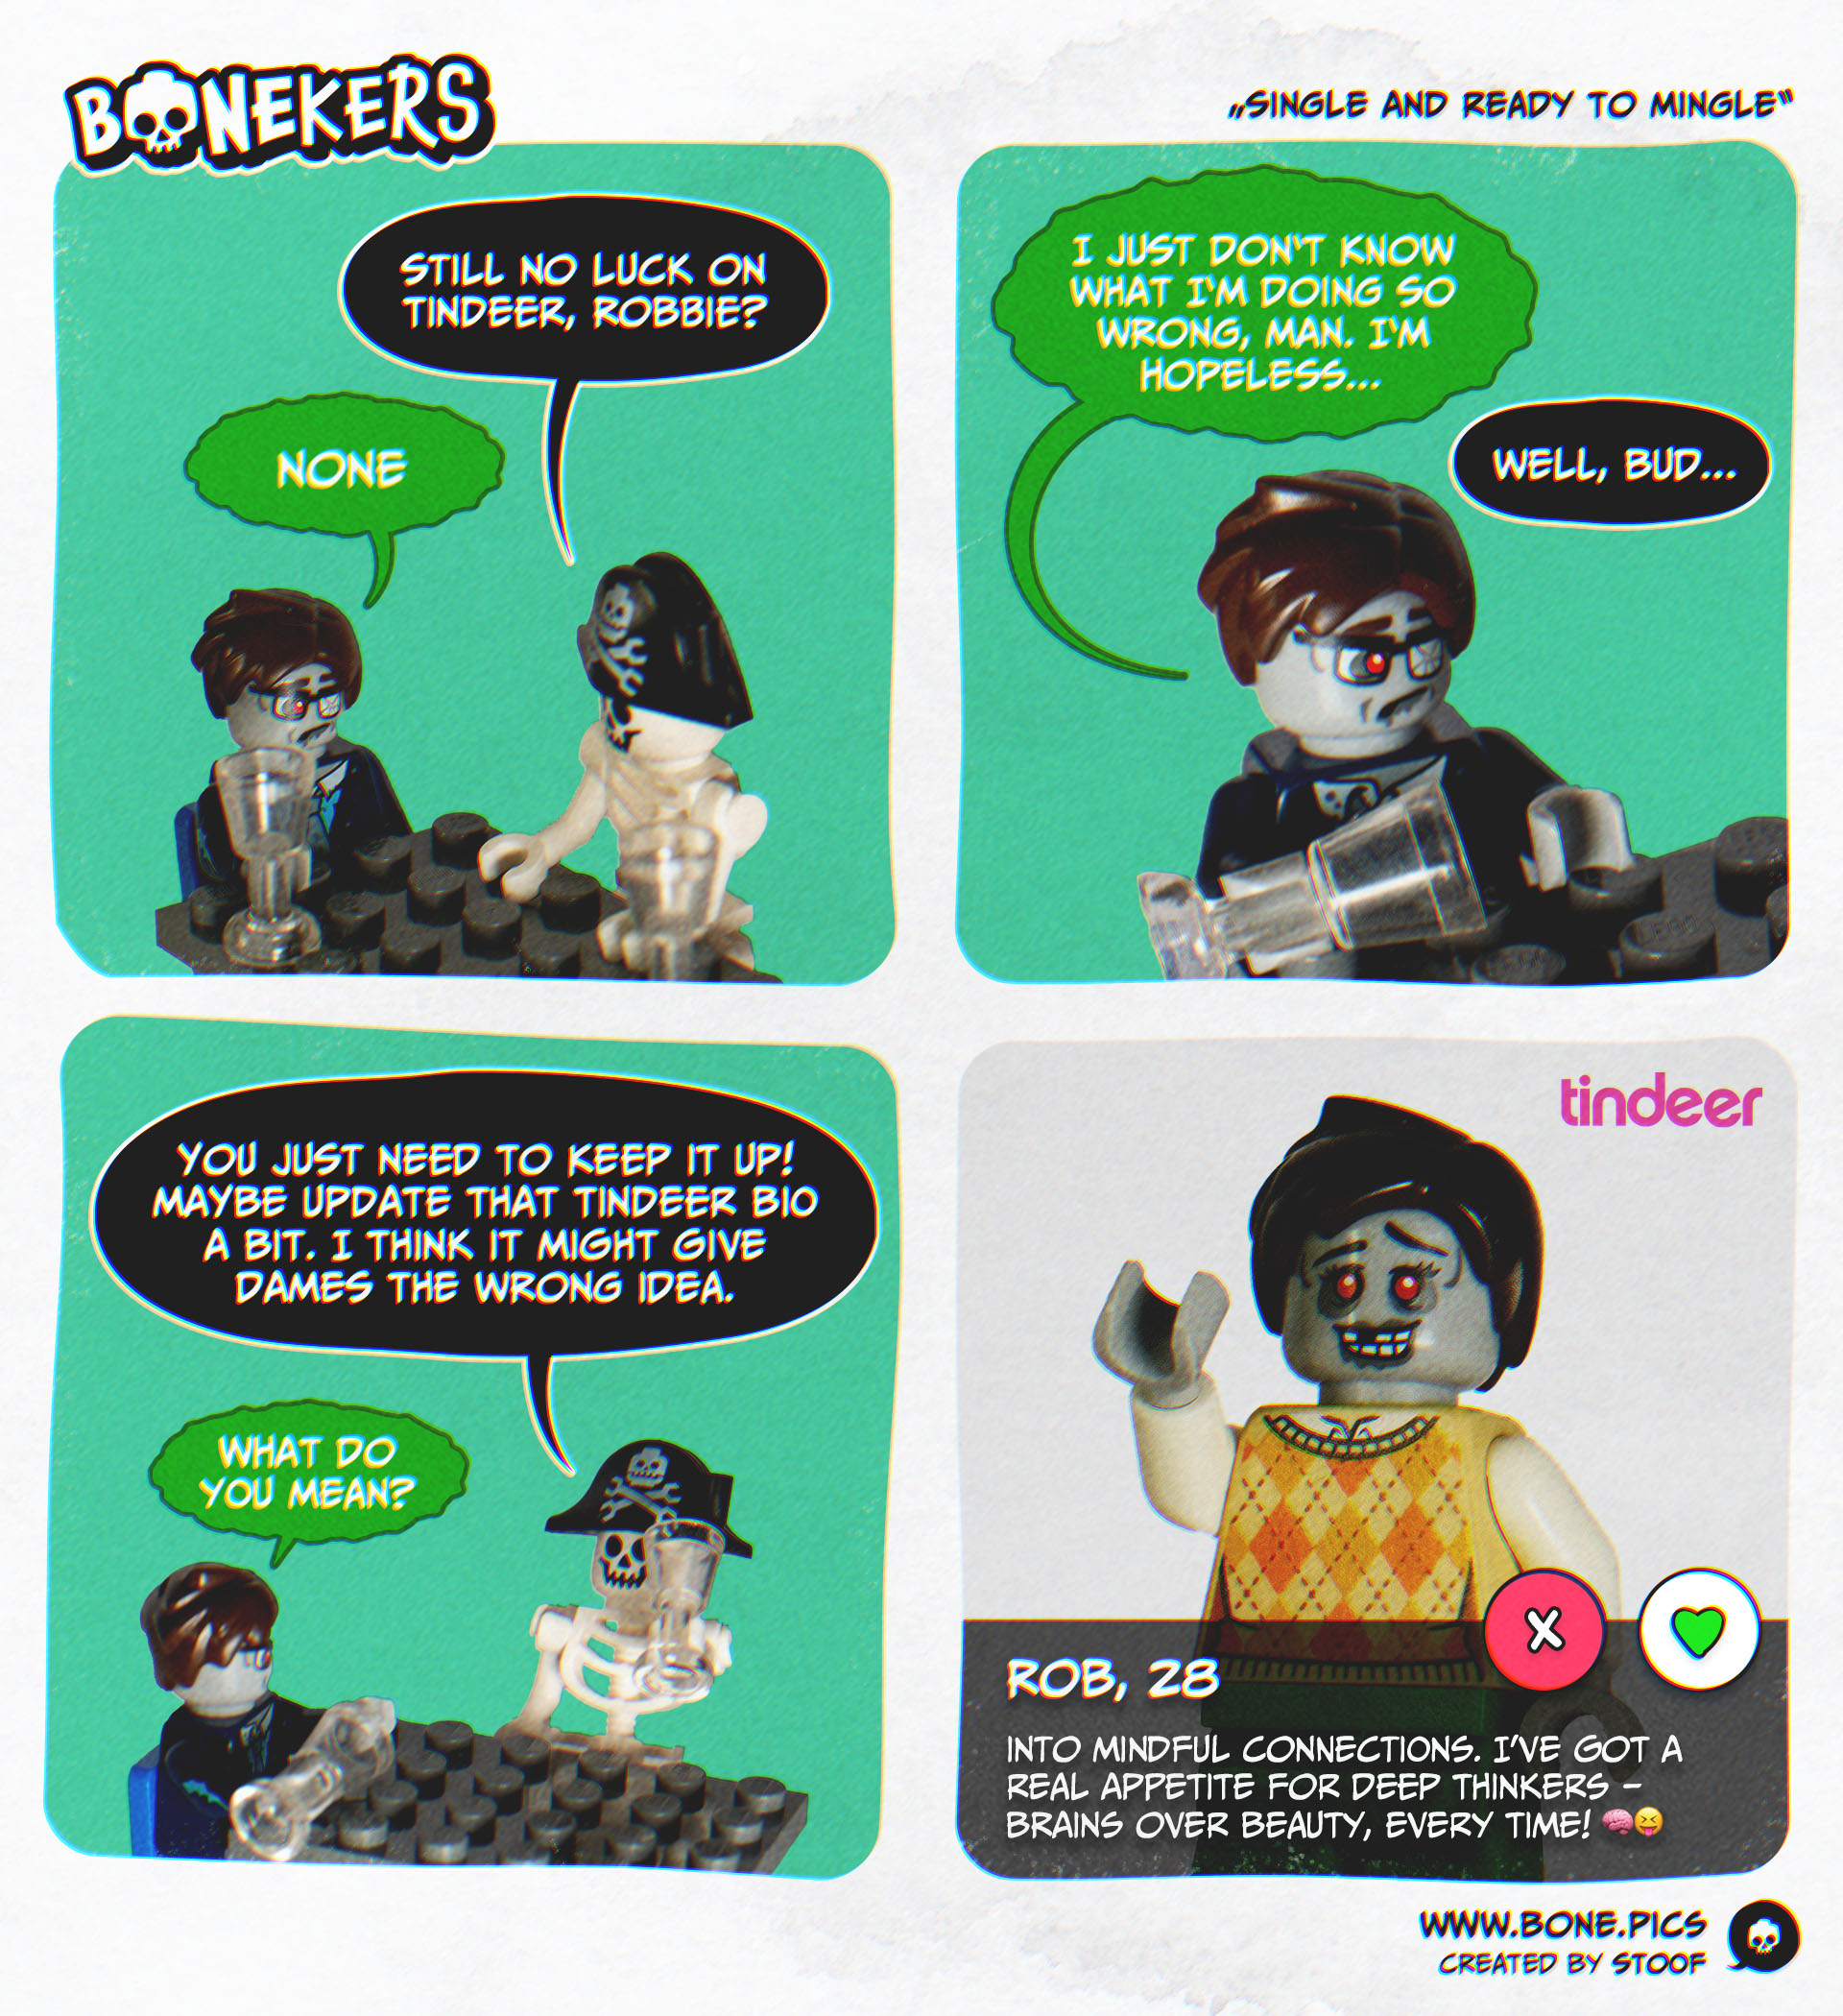 A four panel comic featuring a zombie in business attire with a sad look called Rob and our resident skeleton with a pirate hat - Skully. They're sitting on a table, drinking. In the first panel Skully asks "Still no luck on Tindeer, Robbie?" and the zombie answers "None". In the second panel the zombie says "I just don‘t know what I‘m doing so wrong, man. I‘m hopeless...". Skully answers in panel 3 "Well bud, you just need to keep it up! Maybe update that tindeer bio a bit. I think it might give dames the wrong idea.". Rob asks "What do you mean?". In panel 4 we see Rob's dating profile on the Tindeer app. In his picture he's dressed in a sweater, smiling at the camera with a decomposing smile that's missing a tooth. Below the buttons to approve or deny his request we can see his name, his age (28) and his description, which states "Into mindful connections. I’ve got a real appetite for deep thinkers – brains over beauty, every time!" and ends with a brain emoji and a tongue out smiling emoji.